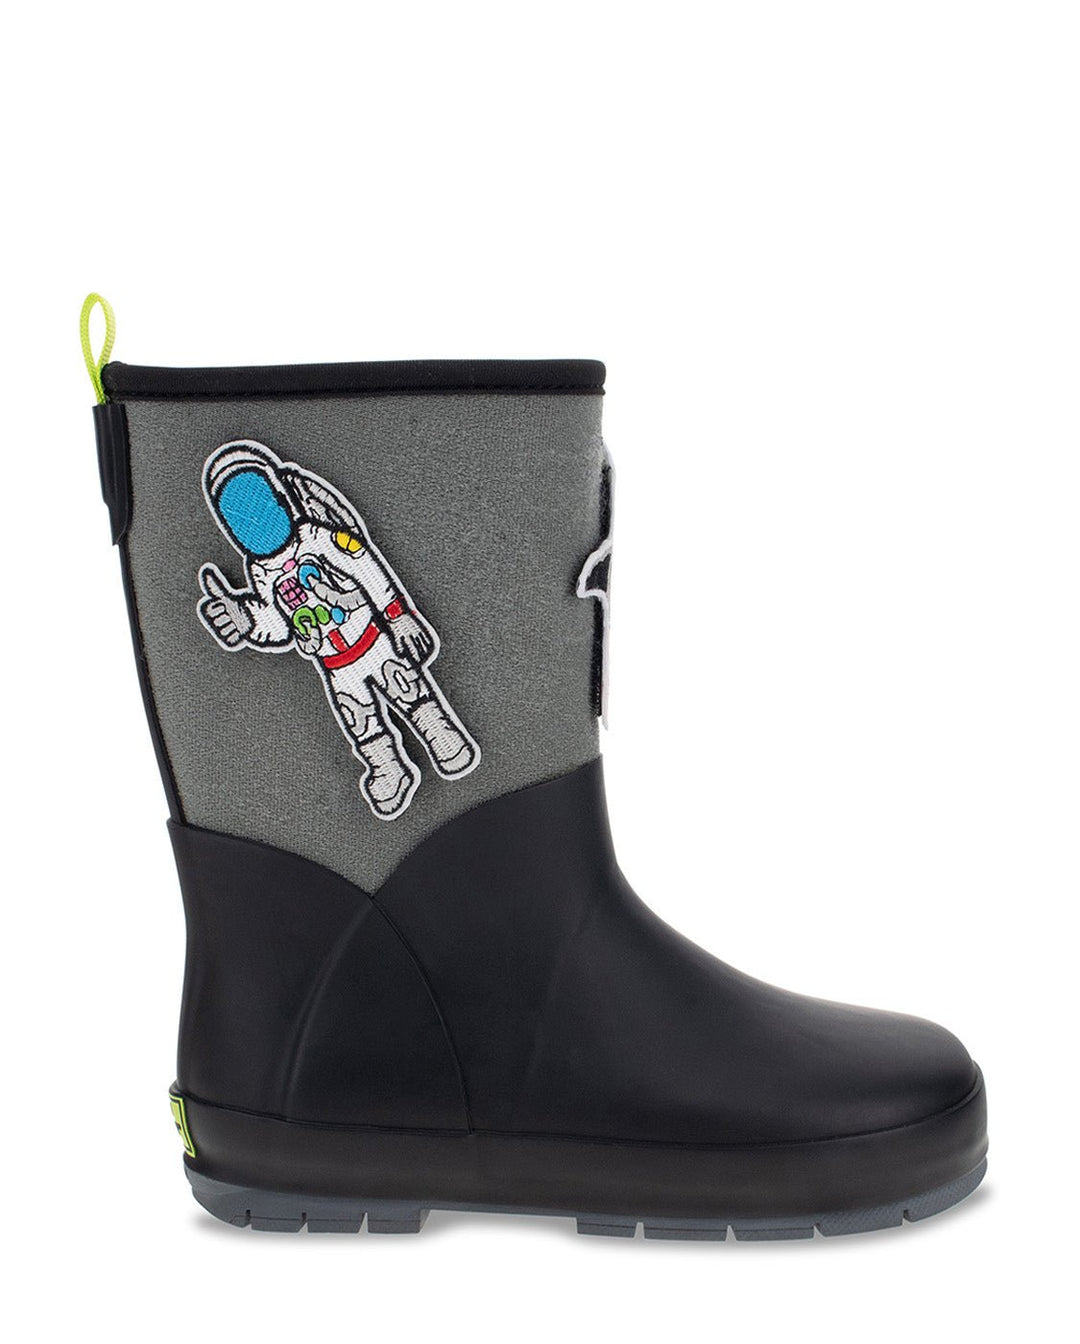 Kids Puddle Patch Rain Boot - Black - Western Chief